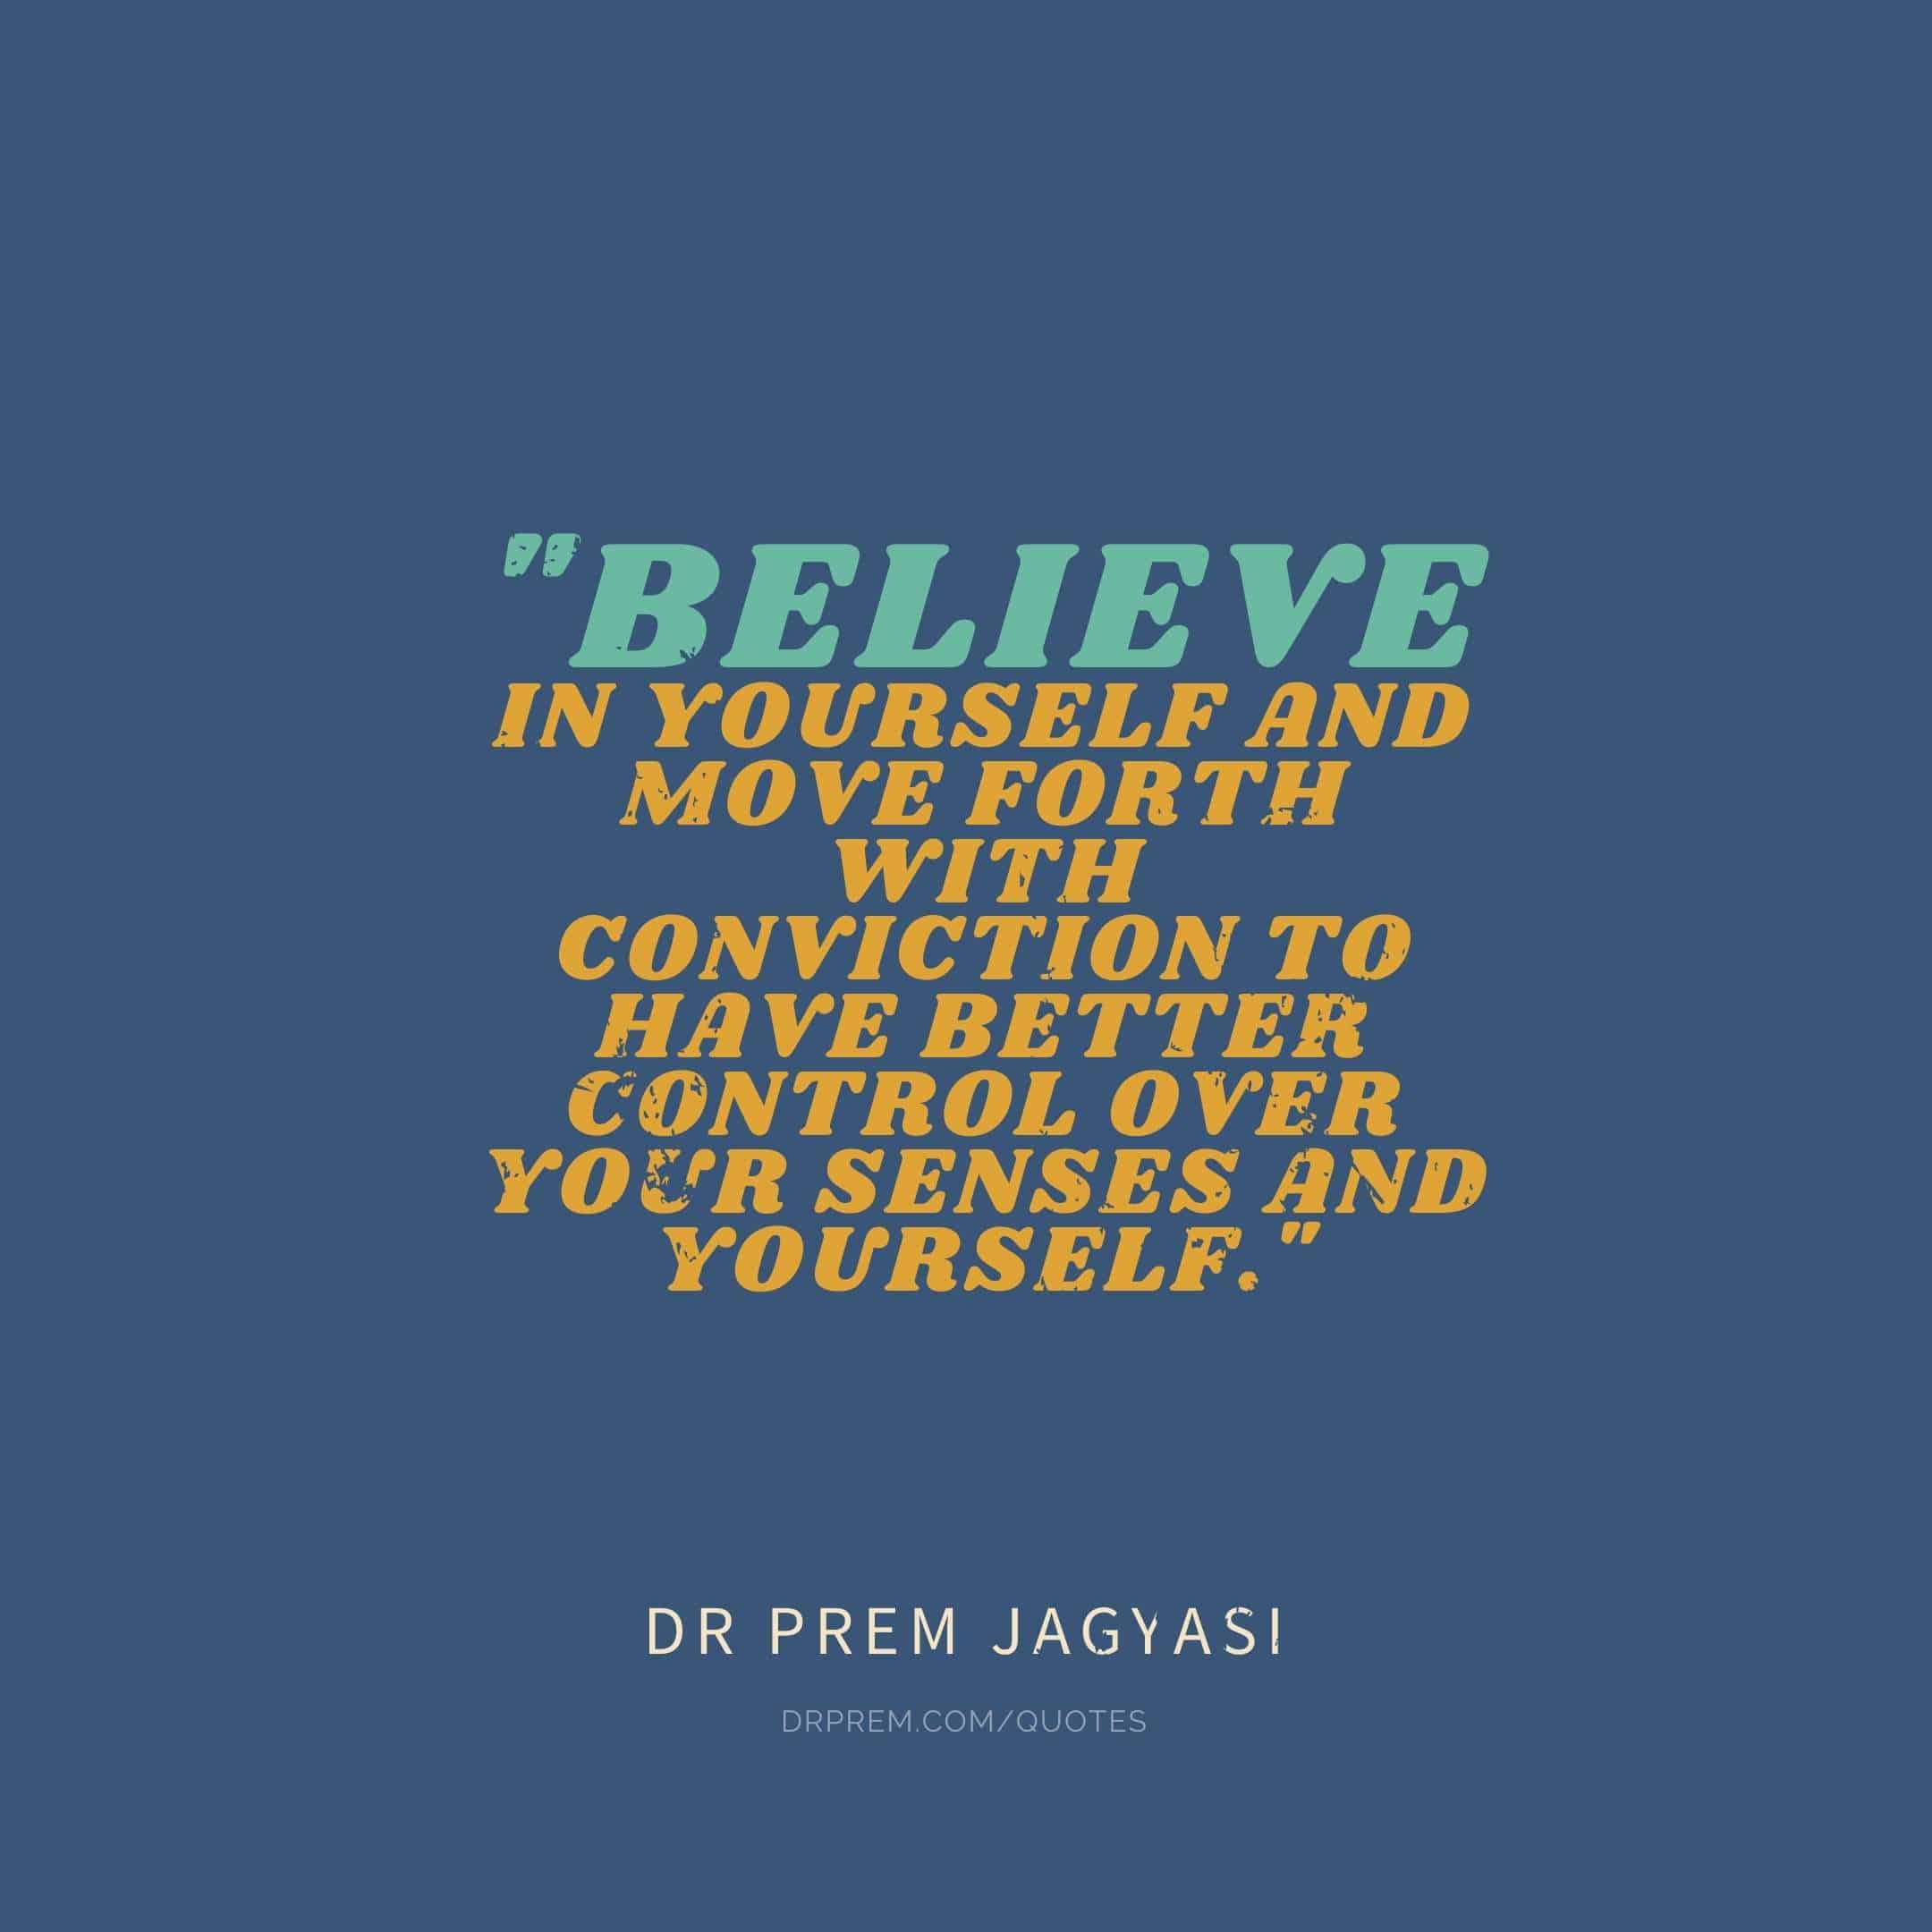 Believe in yourself and move forth with conviction- Dr Prem Jagyasi Quote